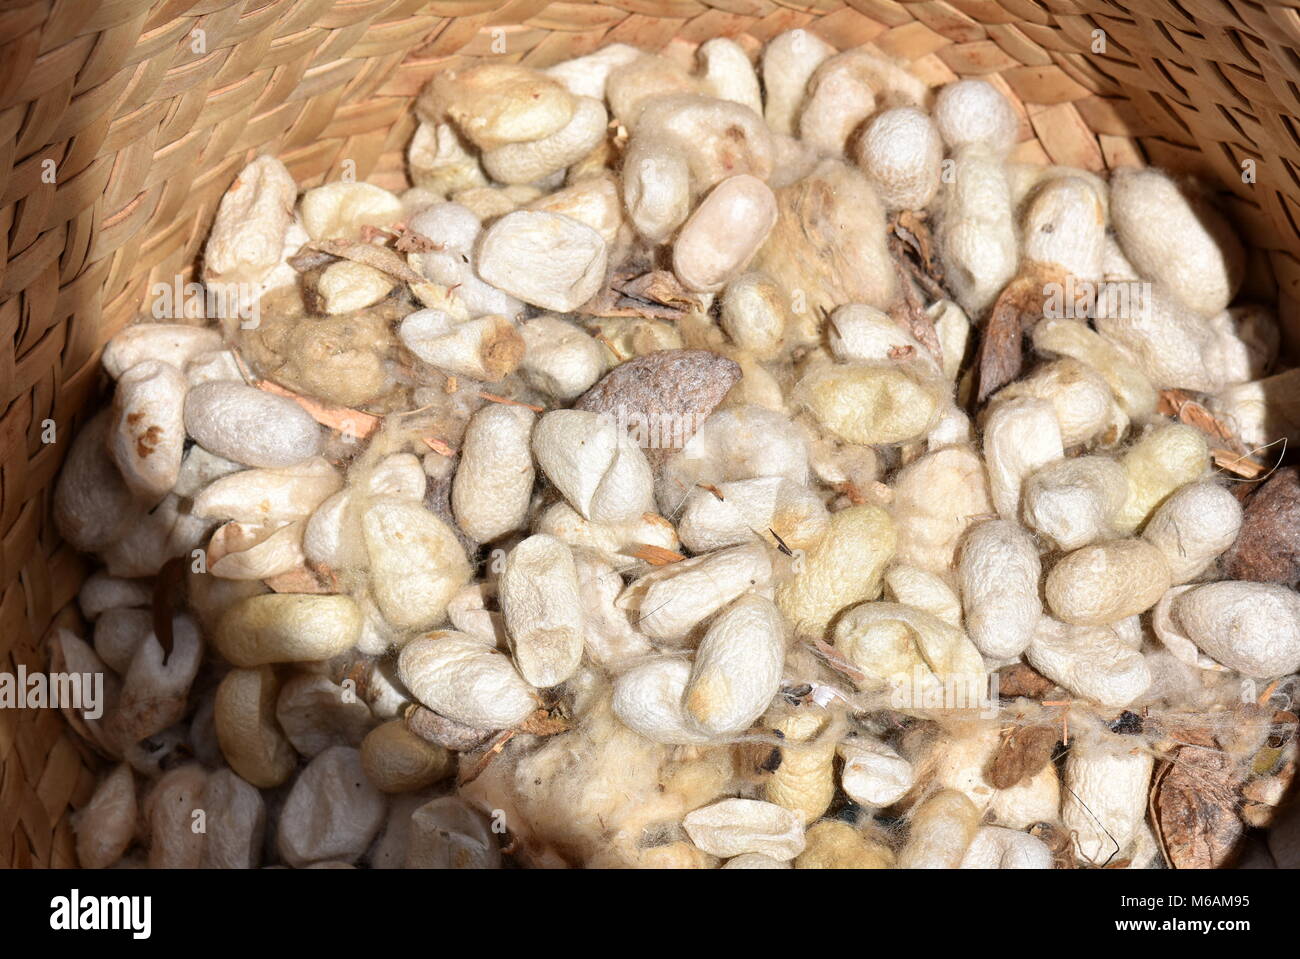 Silk cocoons from silkworm in a basket Stock Photo